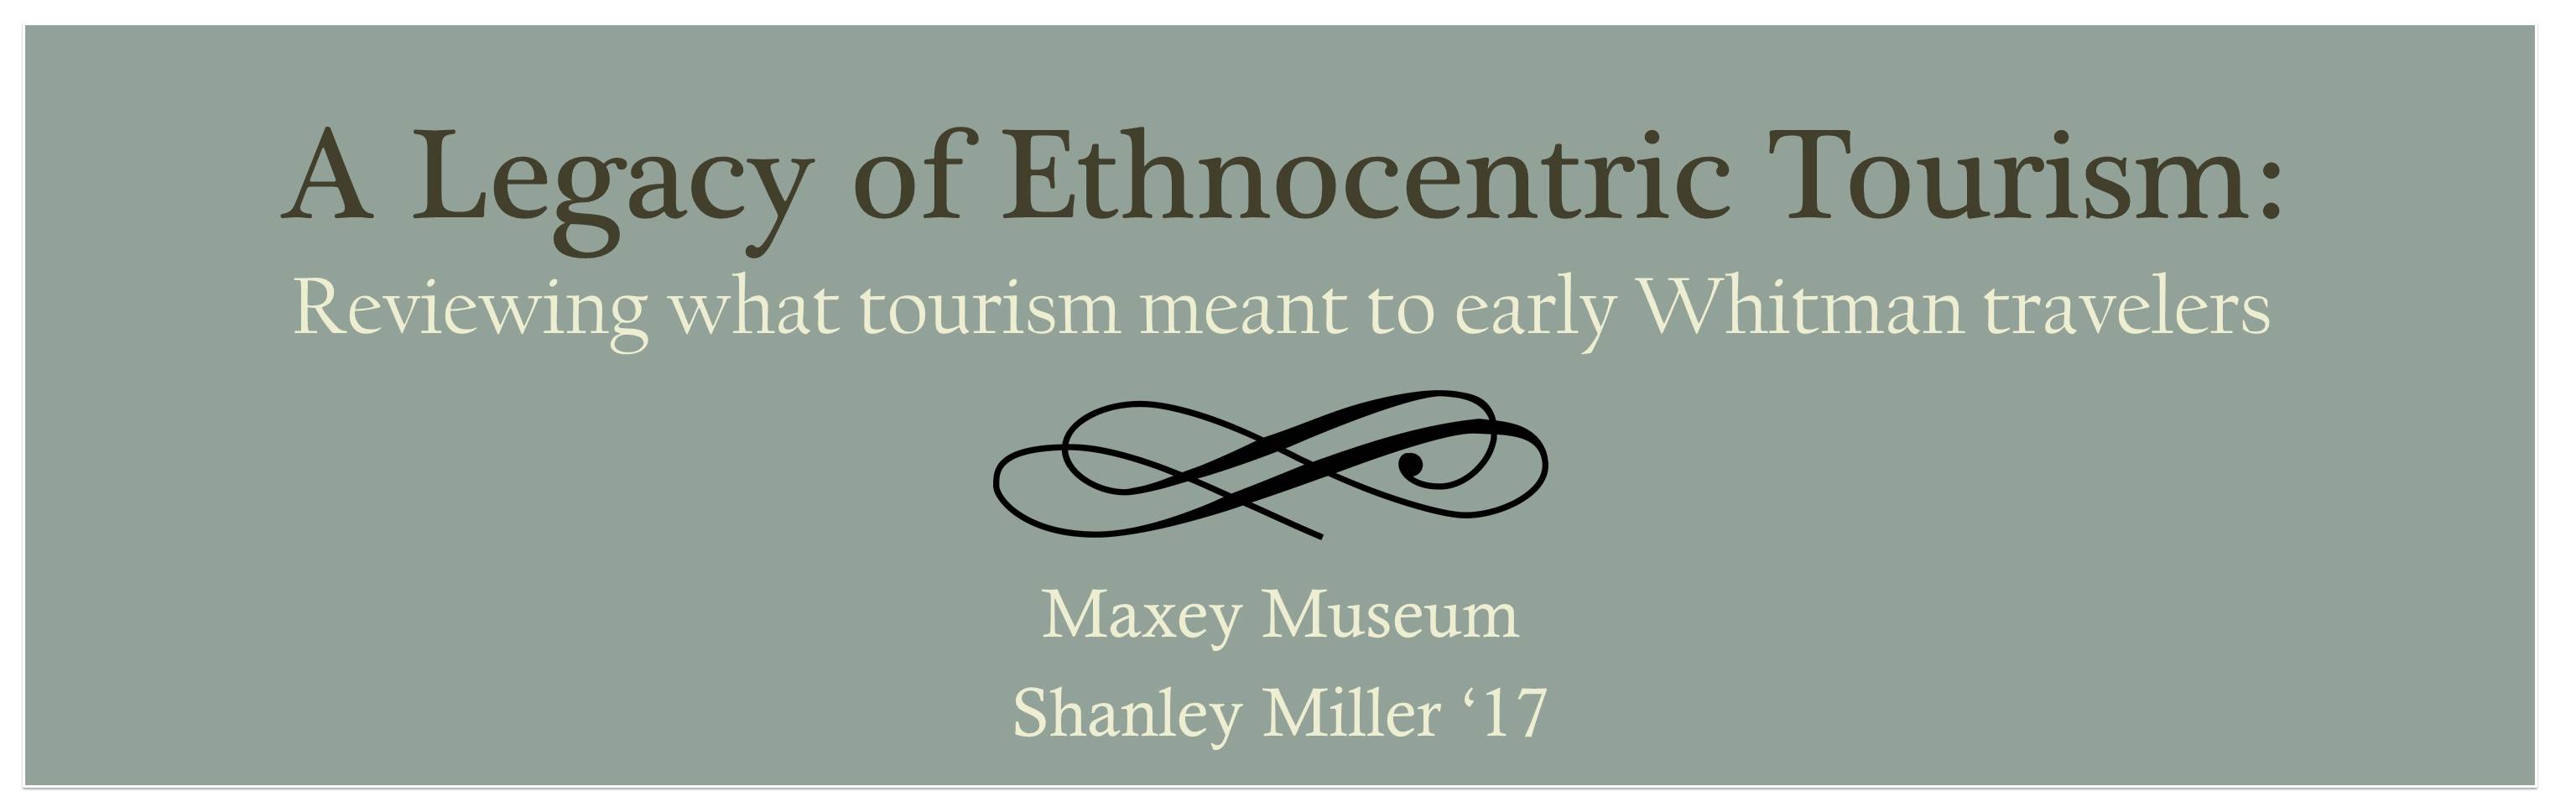 A Legacy of Ethnocentric Tourism Cover Photo